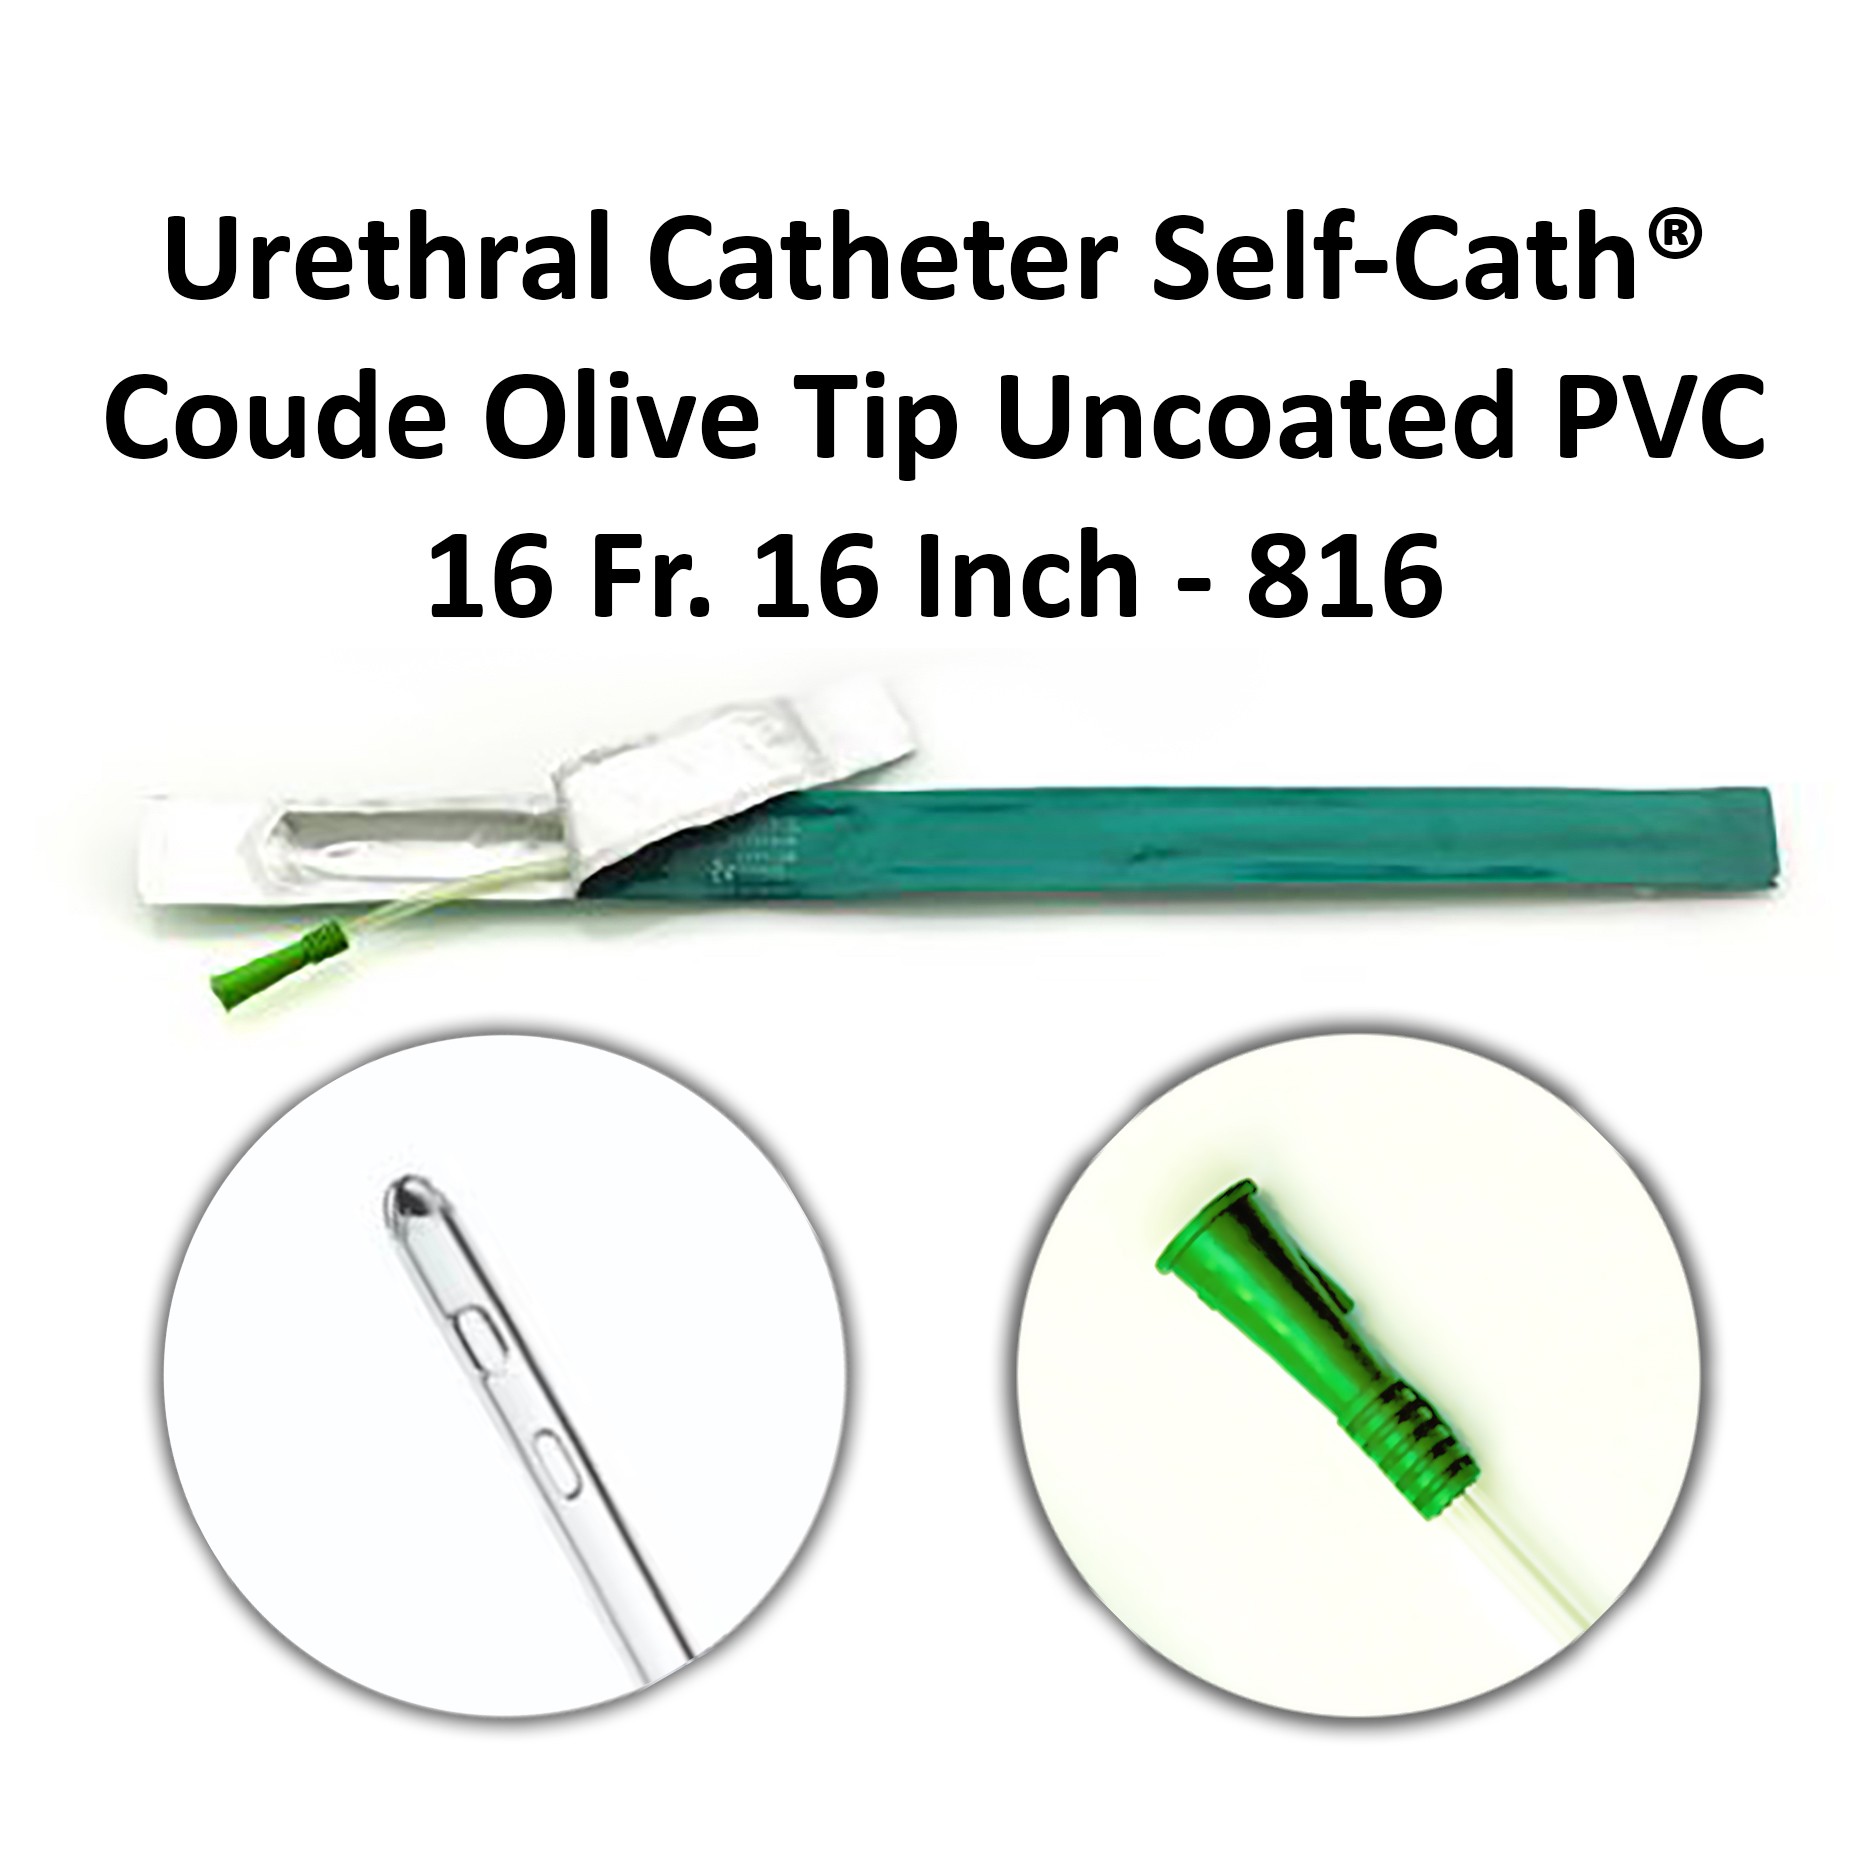 Urethral Catheter Self-Cath® Coude Olive Tip Uncoated PVC 16 Fr. 16 Inch - 816